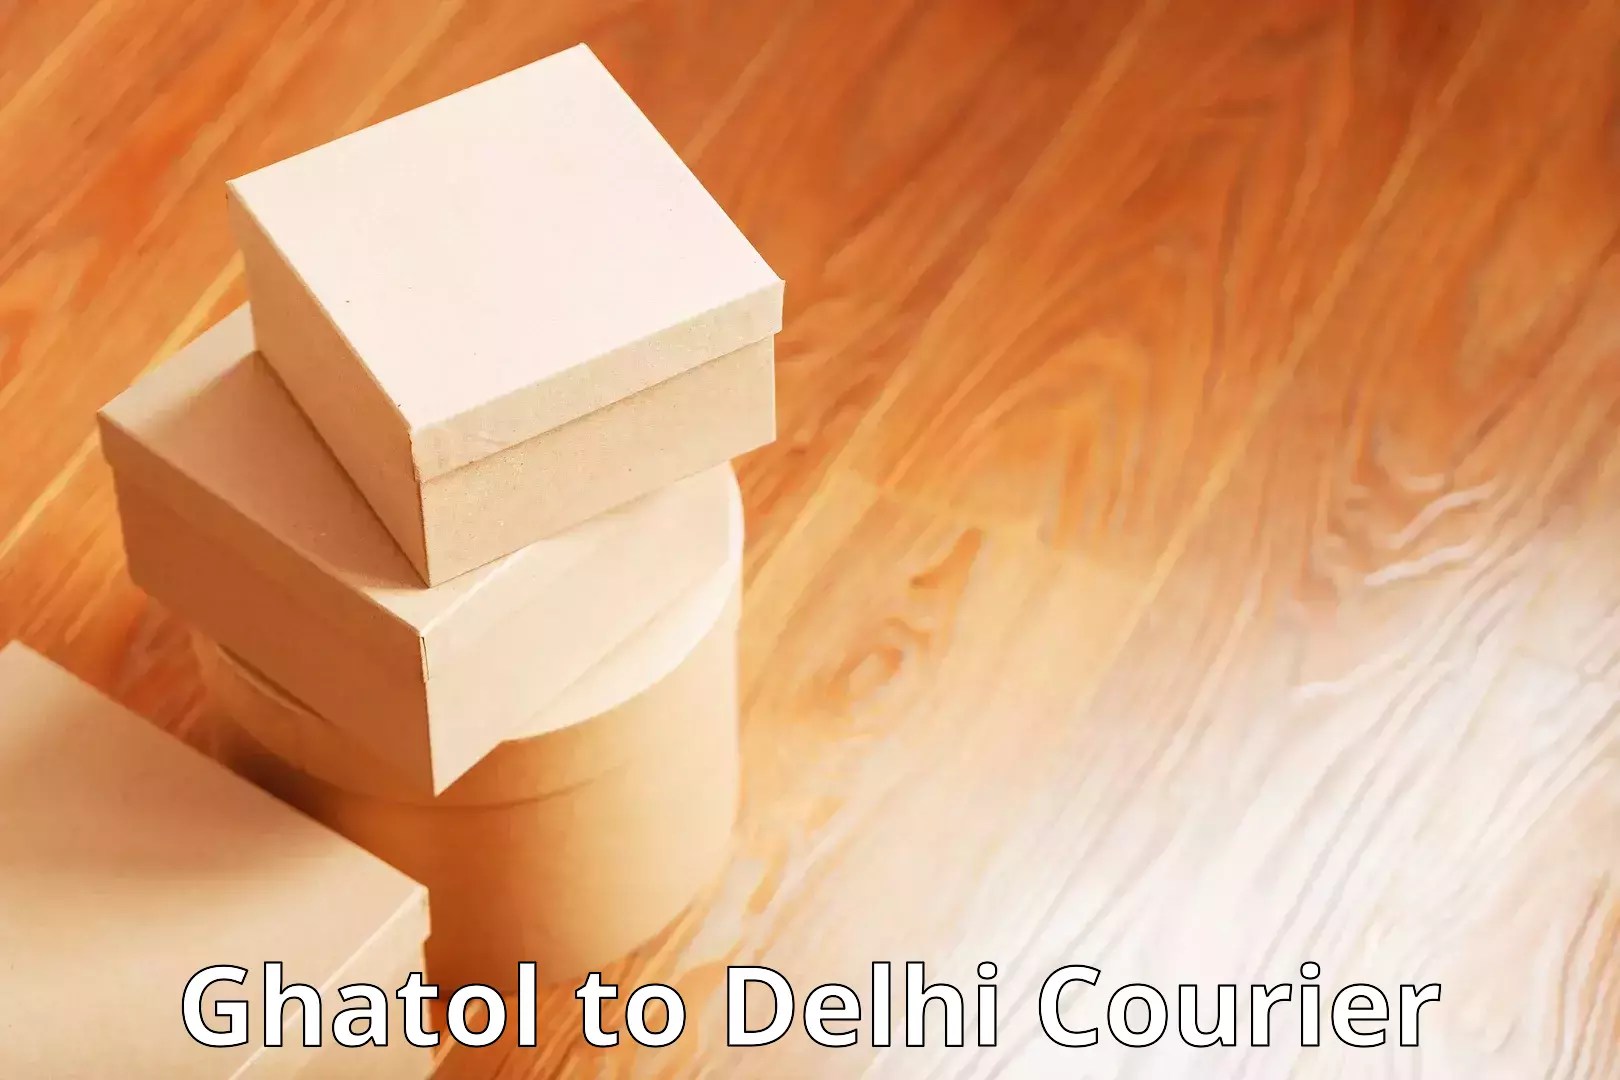 Fast delivery service Ghatol to Burari